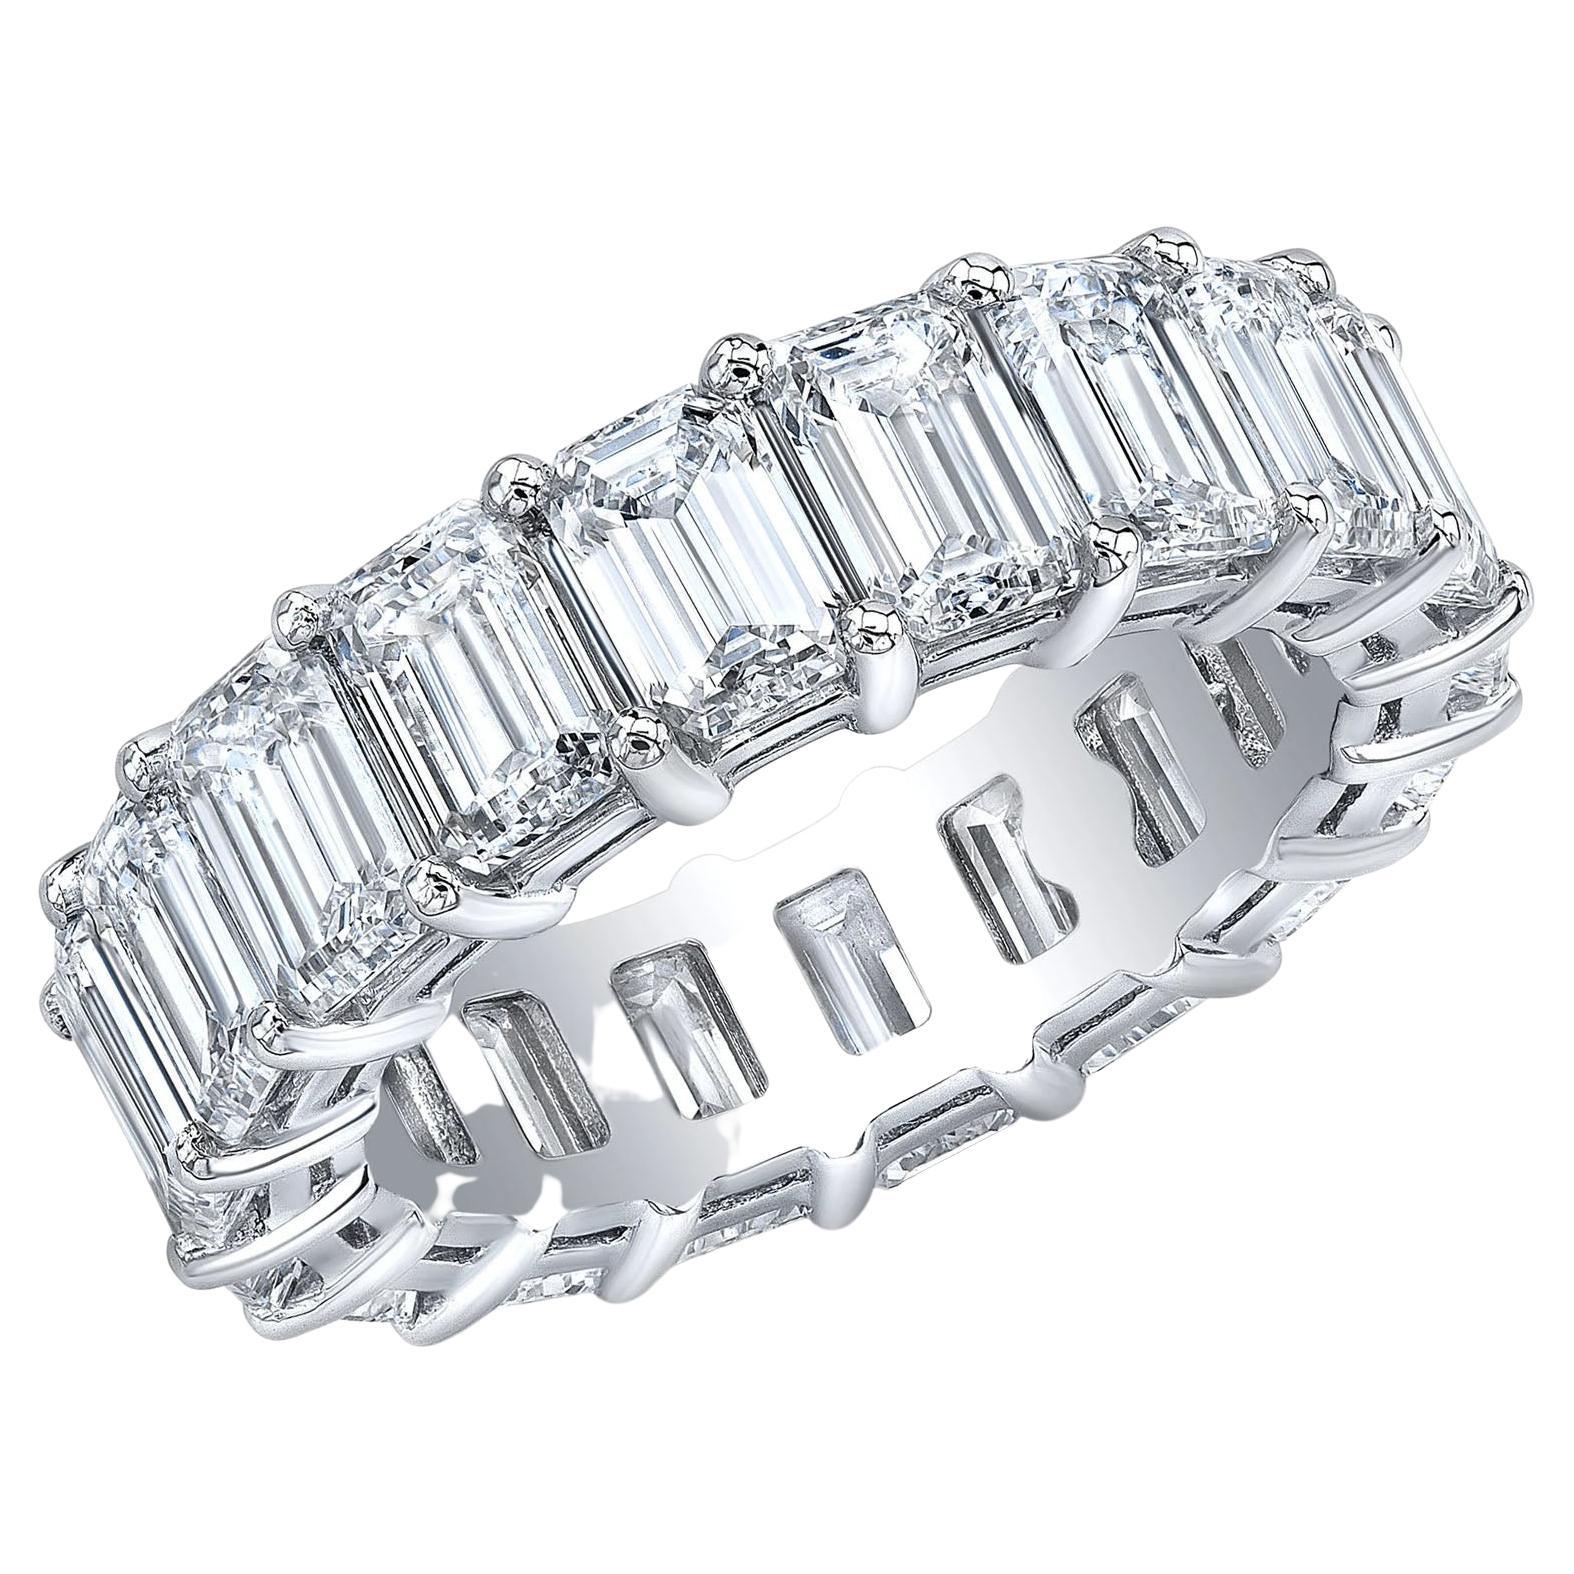 For Sale:  6 Carats Emerald Cut Eternity Band Shared Prongs F-G Color VS1 Clarity Platinum